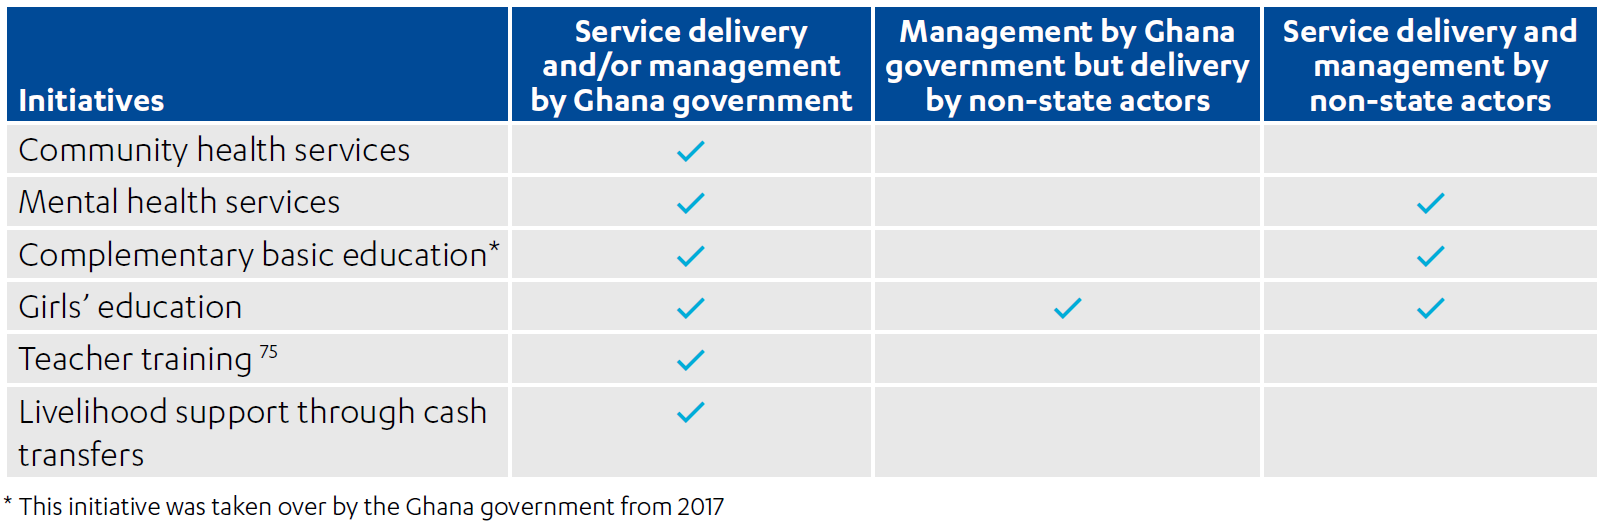 Table showing New social sector initiatives started in the 2011–2015 Operational Plan period by ticked box